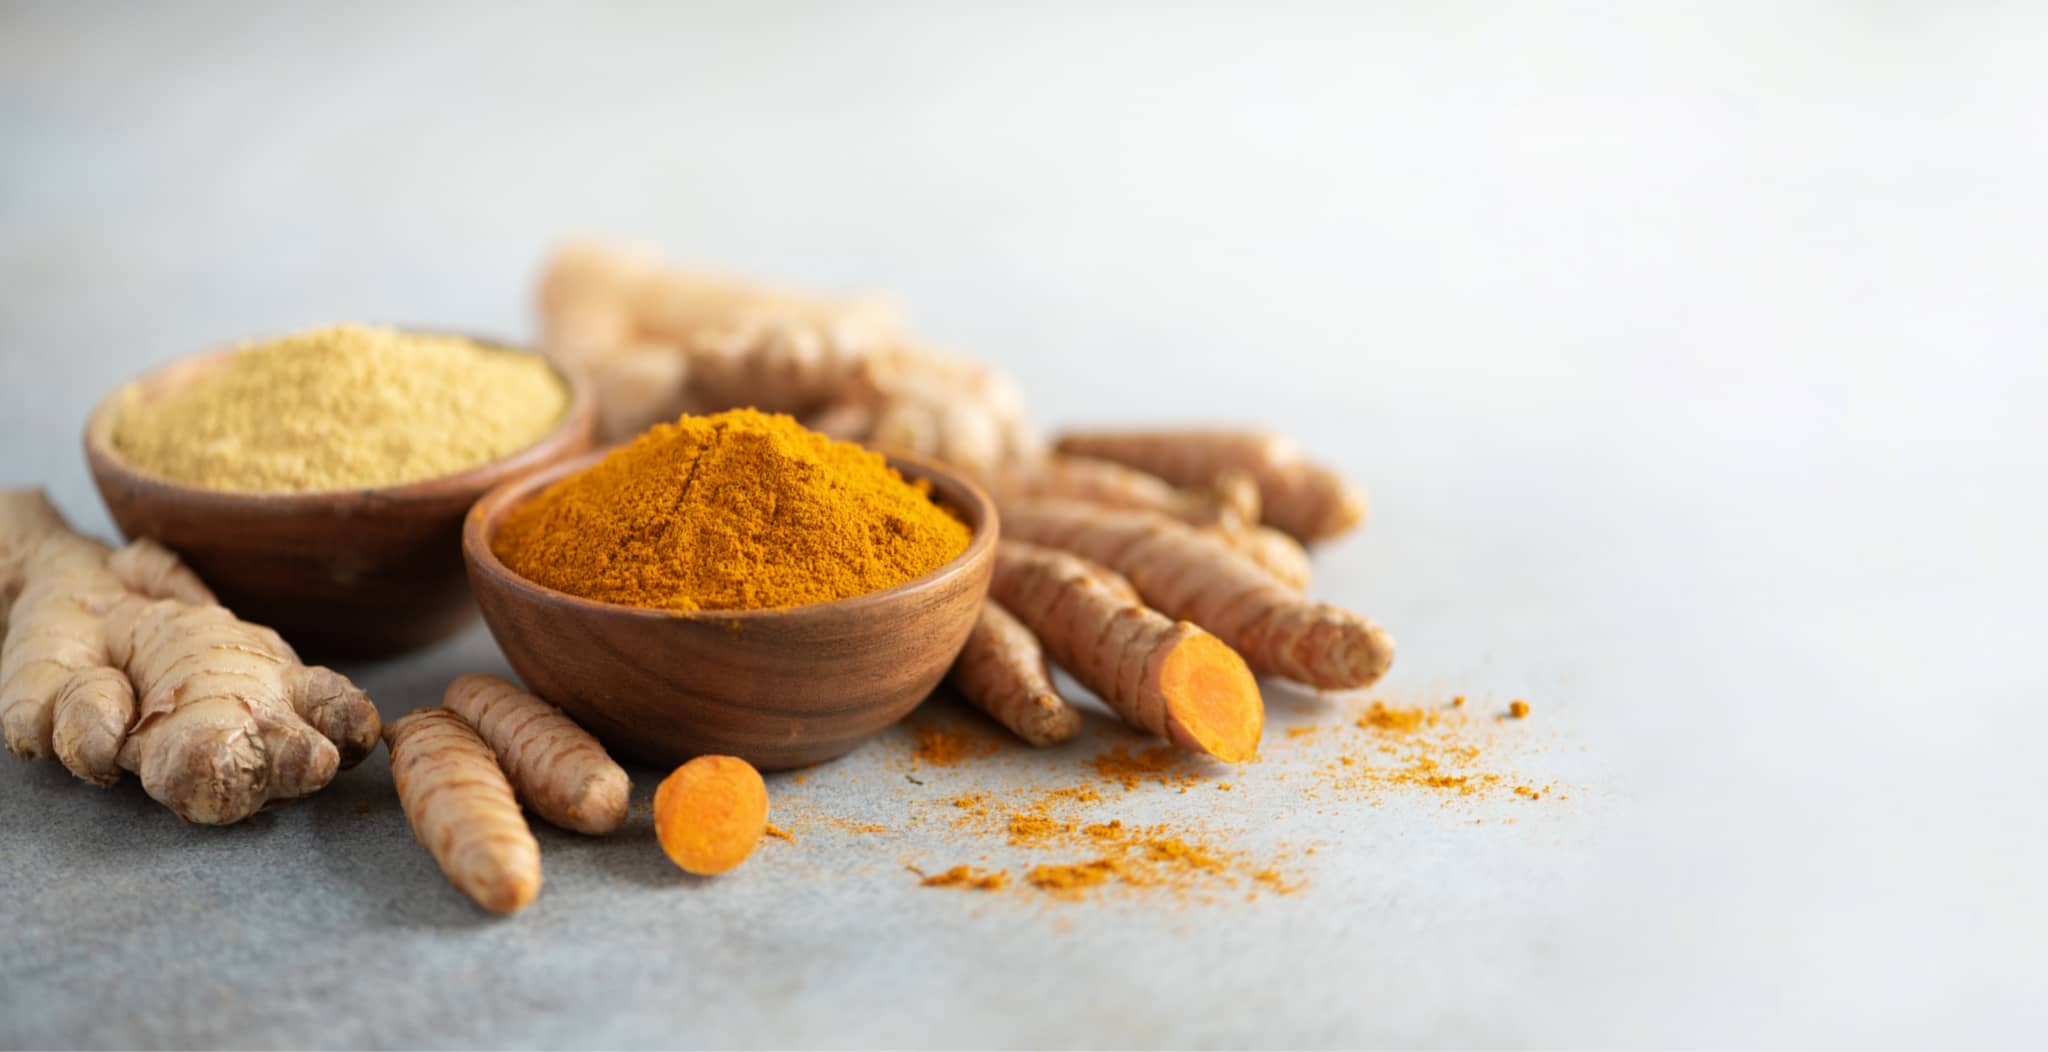 EQU Streamz blog on Turmeric in horses and a comprehensive guide to using on horses for health benefits